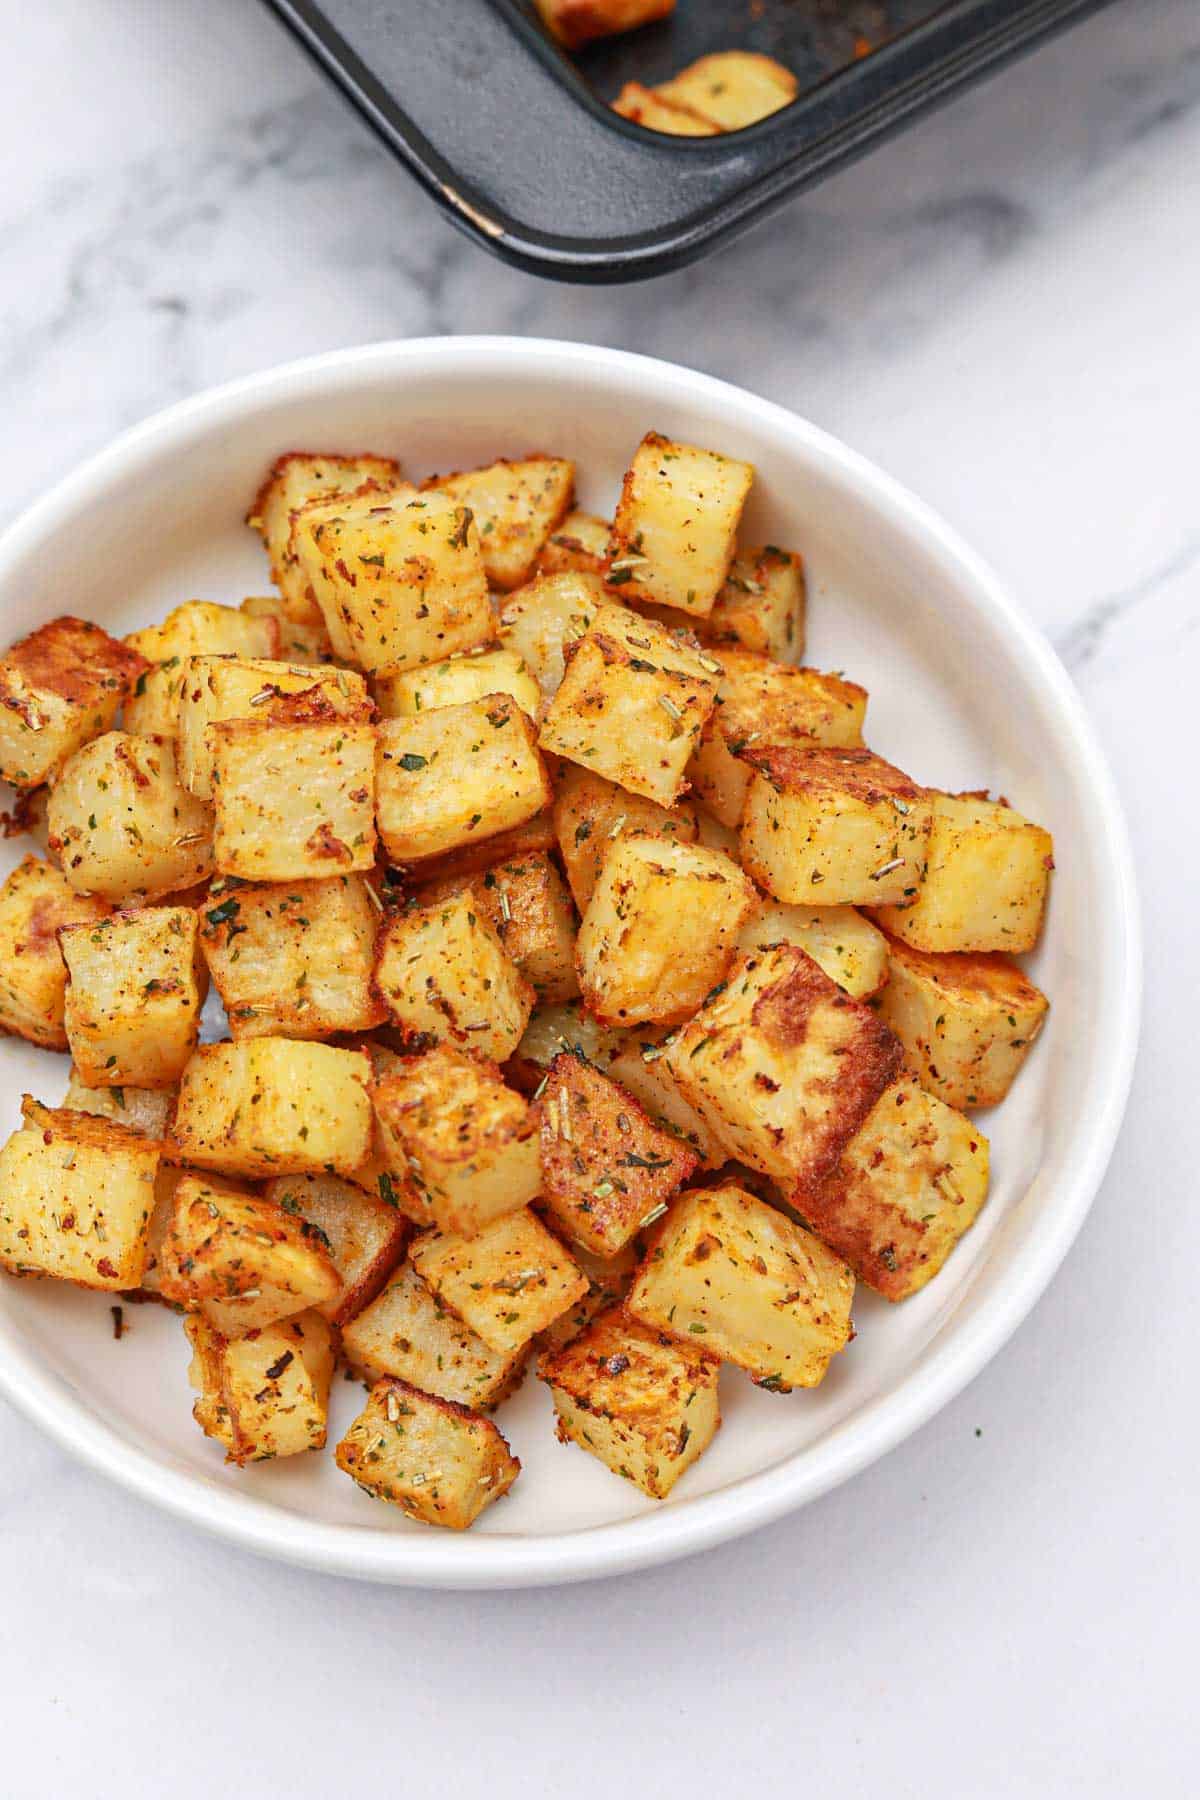 baked diced potatoes served  in a white bowl.